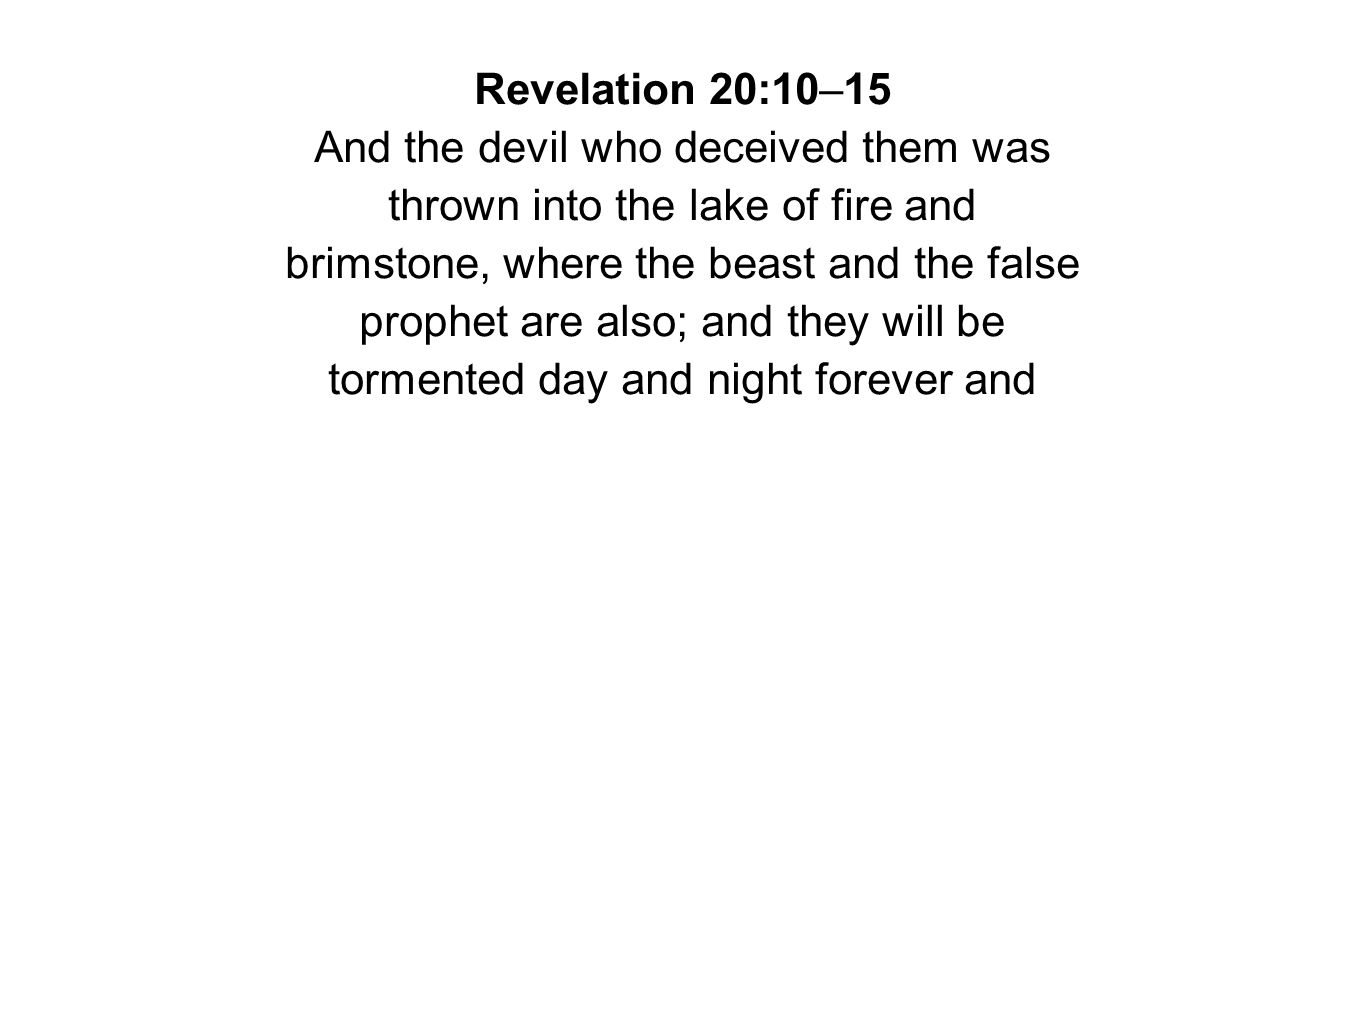 Revelation 20:10–15 And the devil who deceived them was thrown into the lake of fire and brimstone, where the beast and the false prophet are also; and they will be tormented day and night forever and